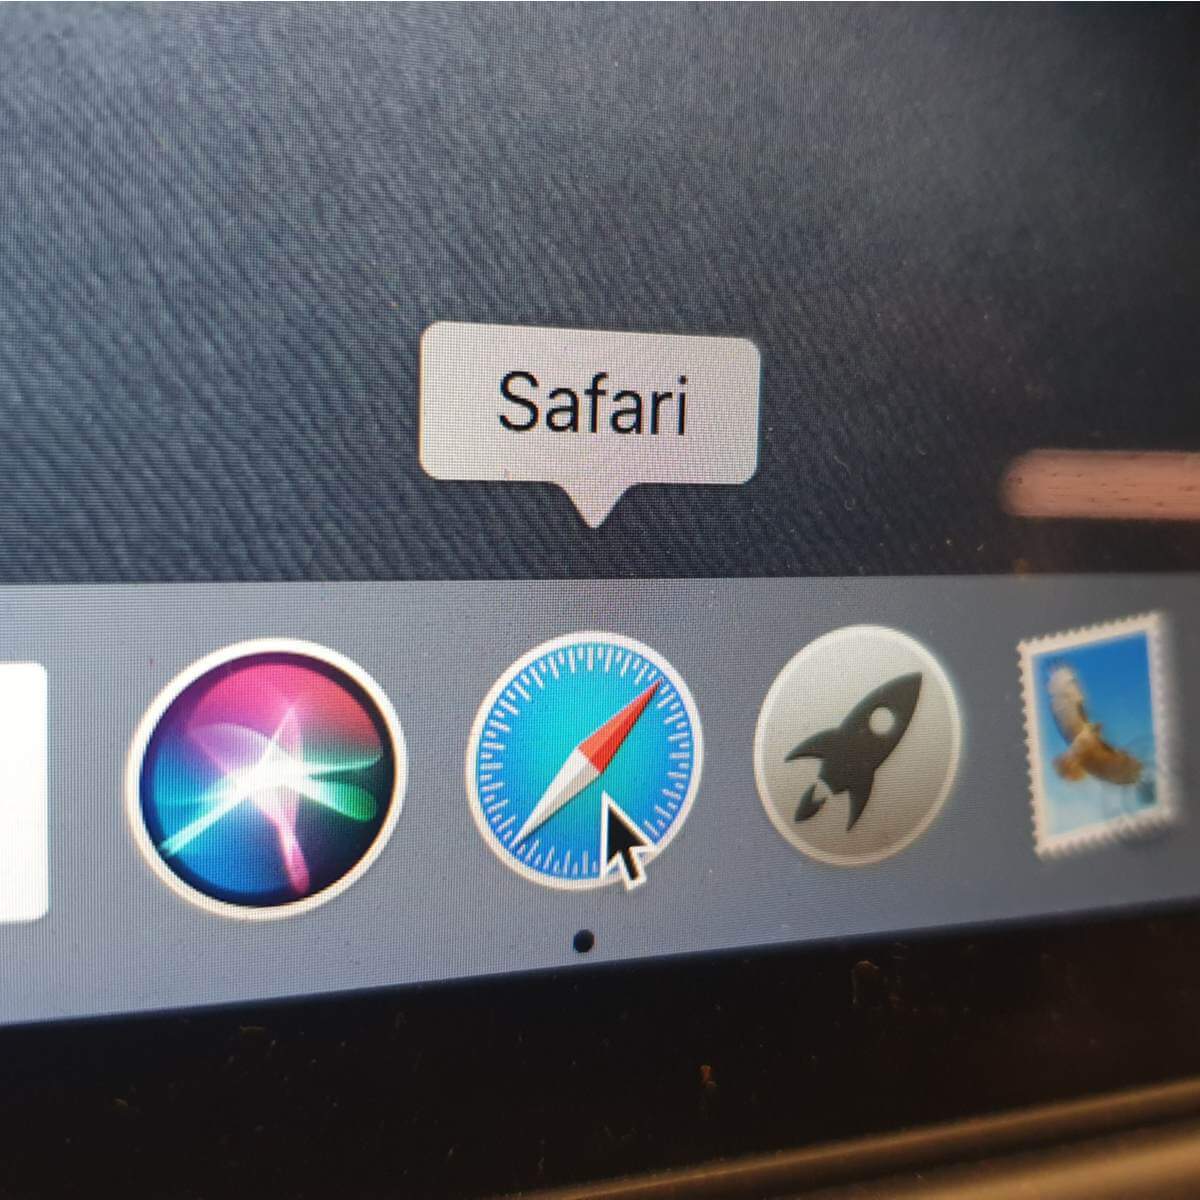 macbook connection is not private safari